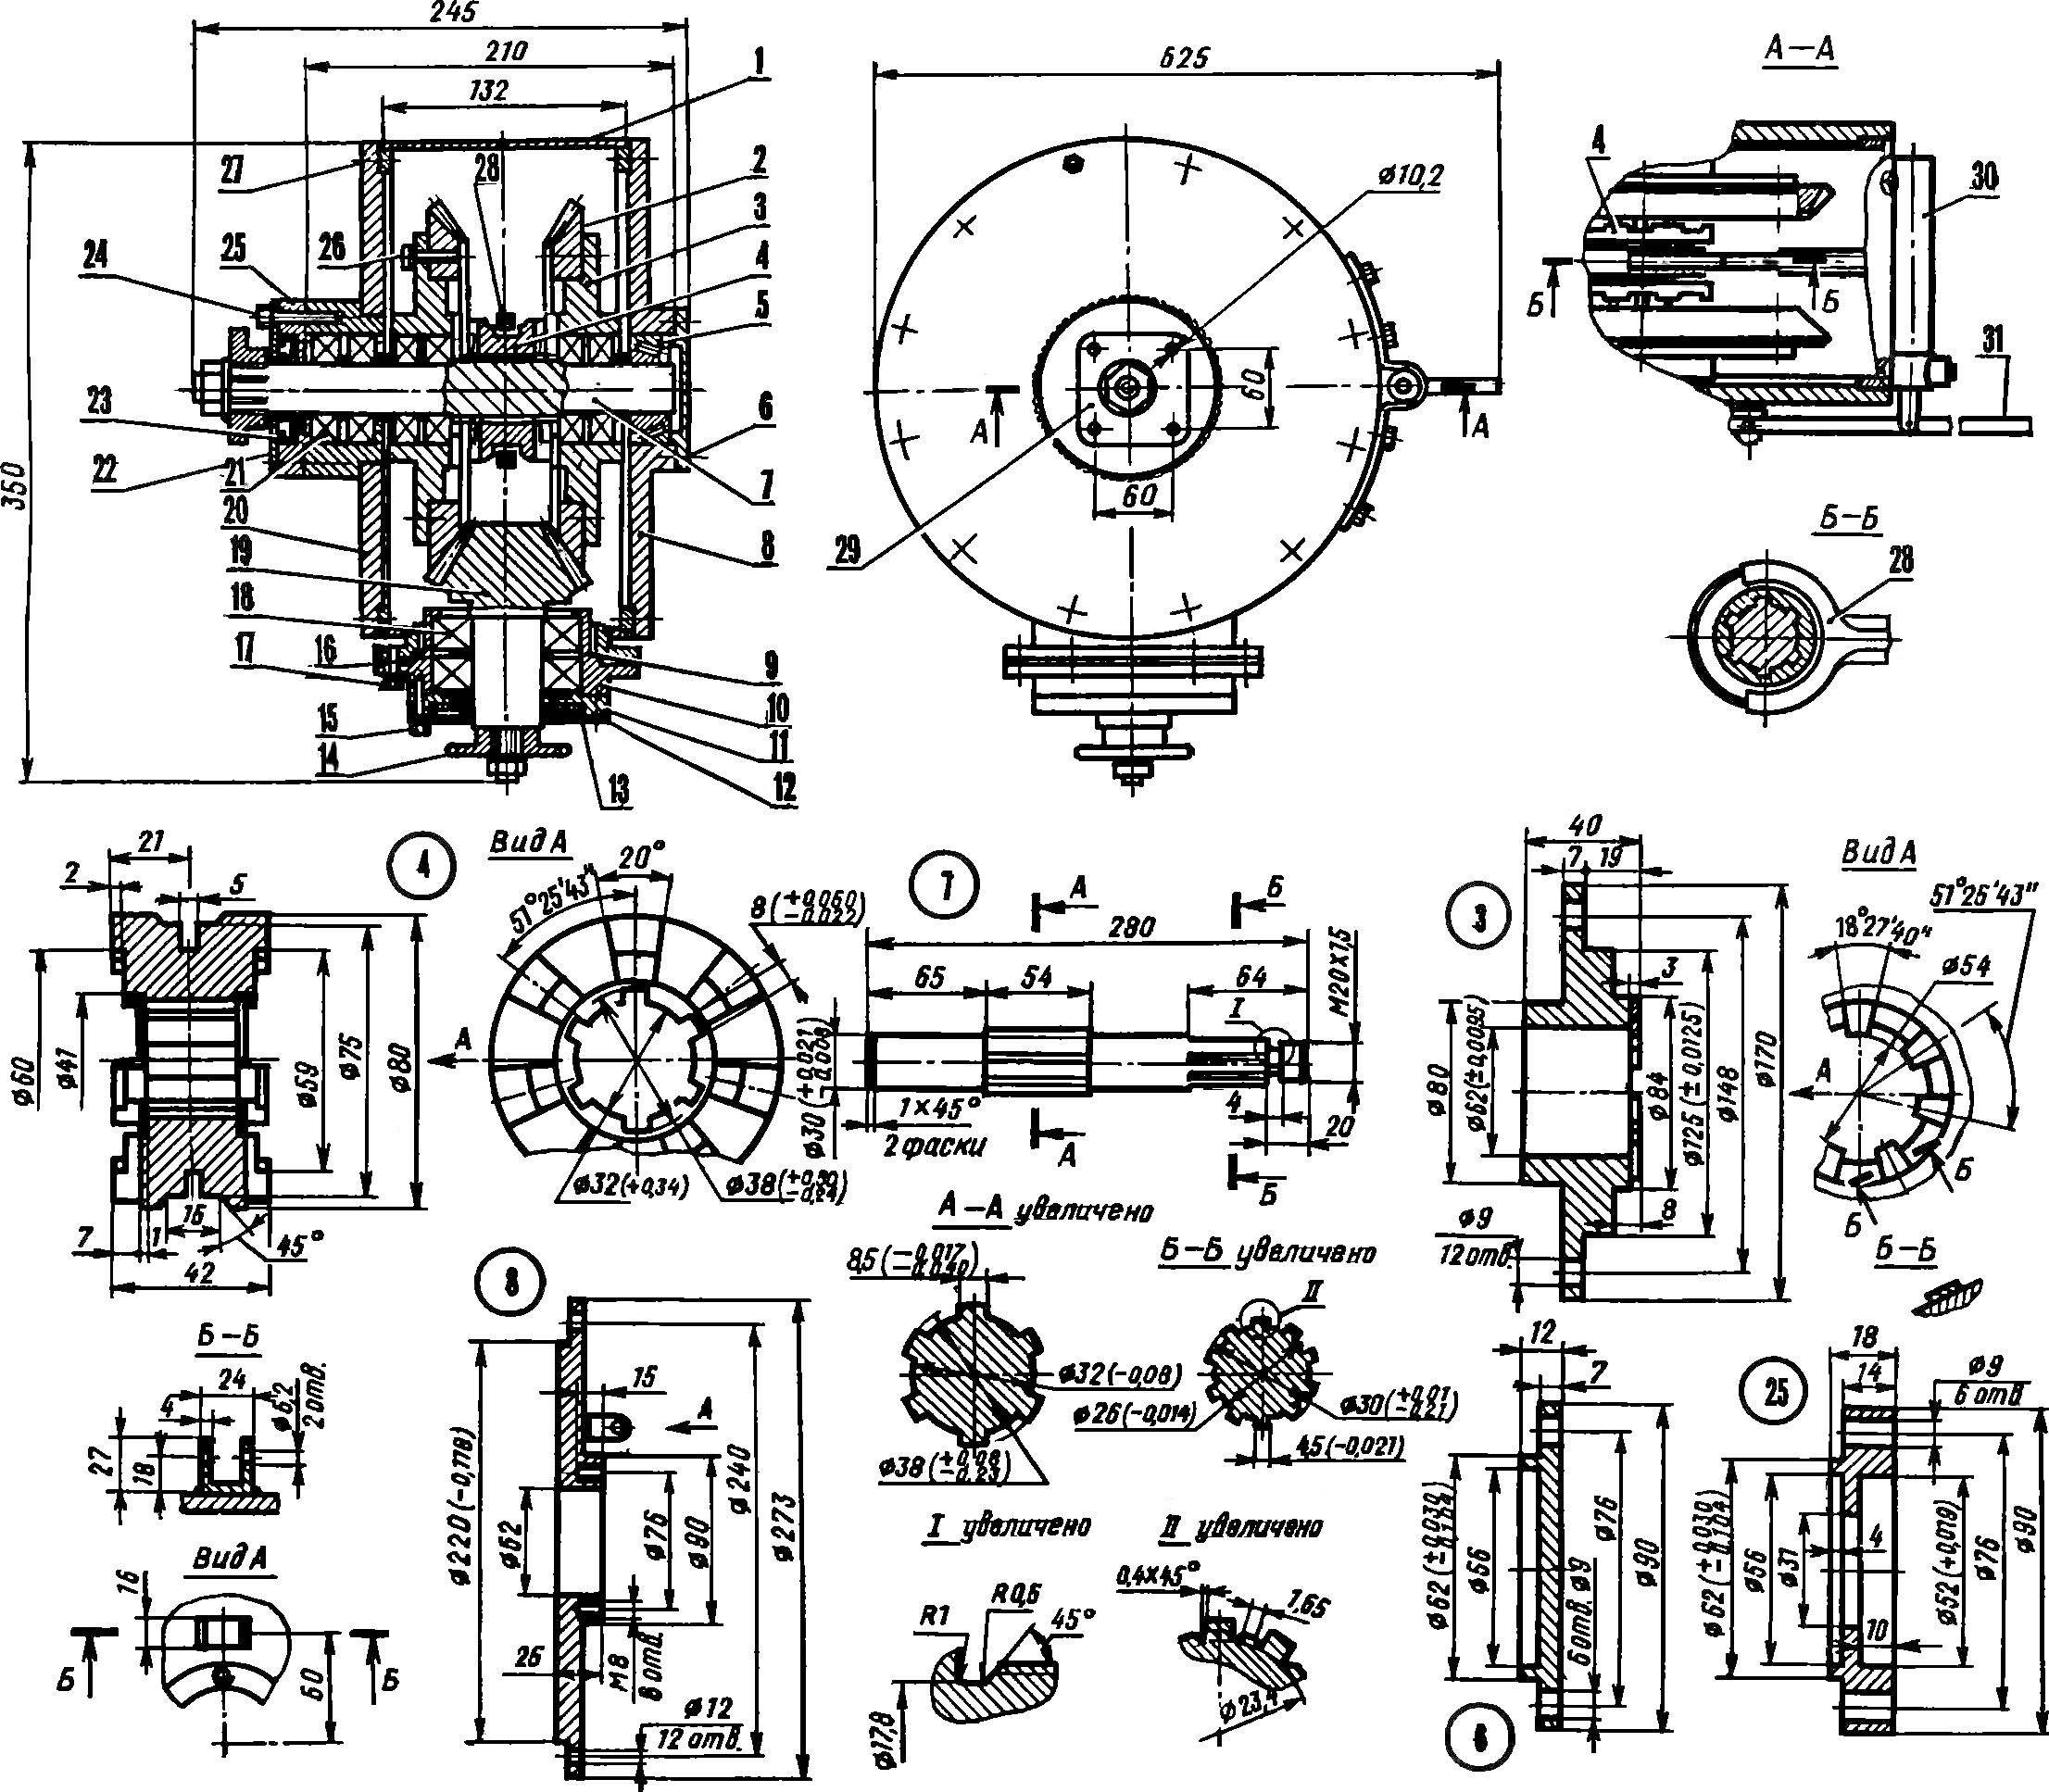 Fig. 1. The layout of the gear.